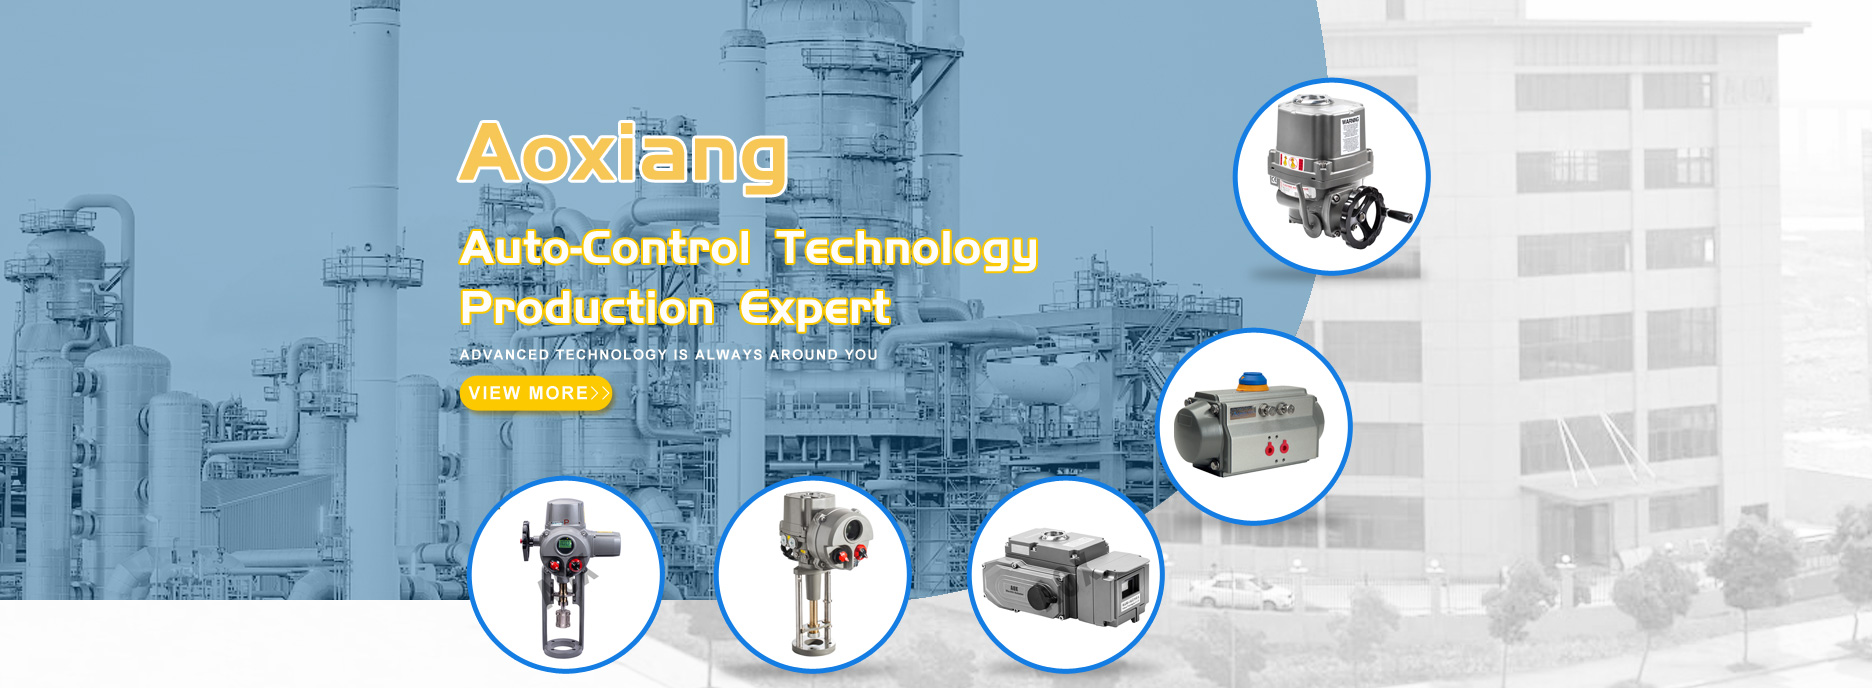 Aoxiang Auto-Control Technology Production Expert